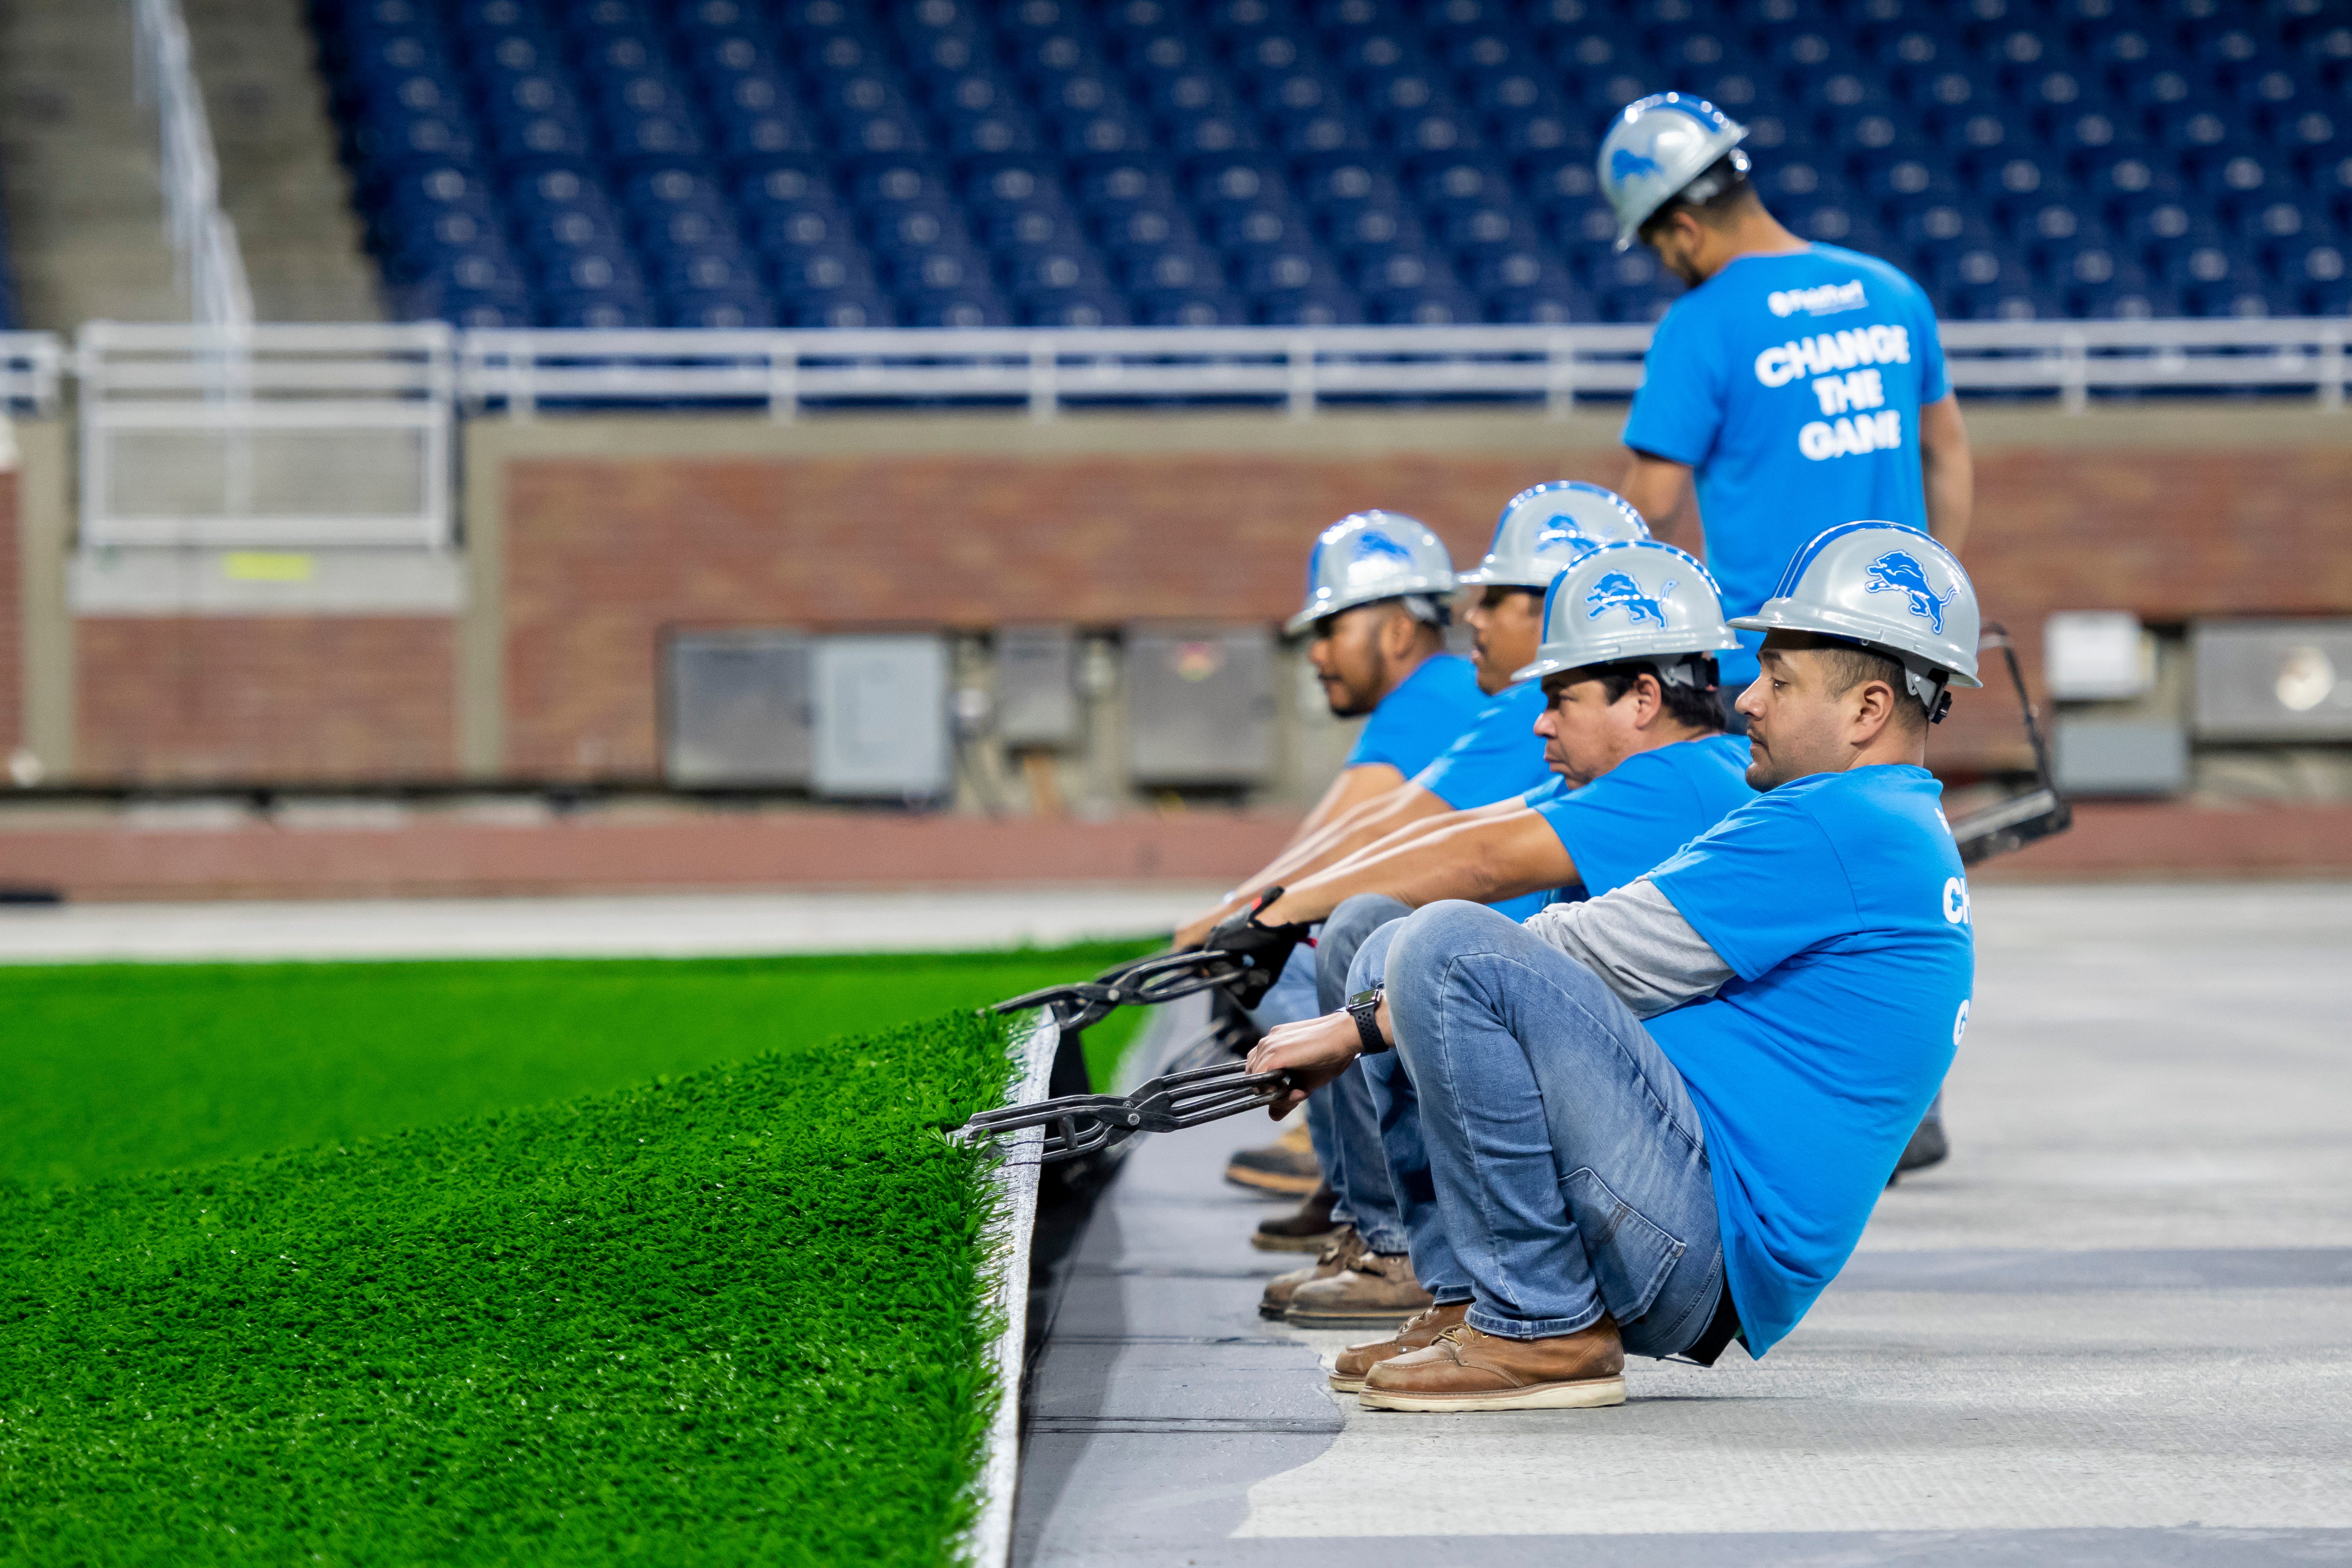 FieldTurf employees stretch the playing surface while installing it at Ford Field.